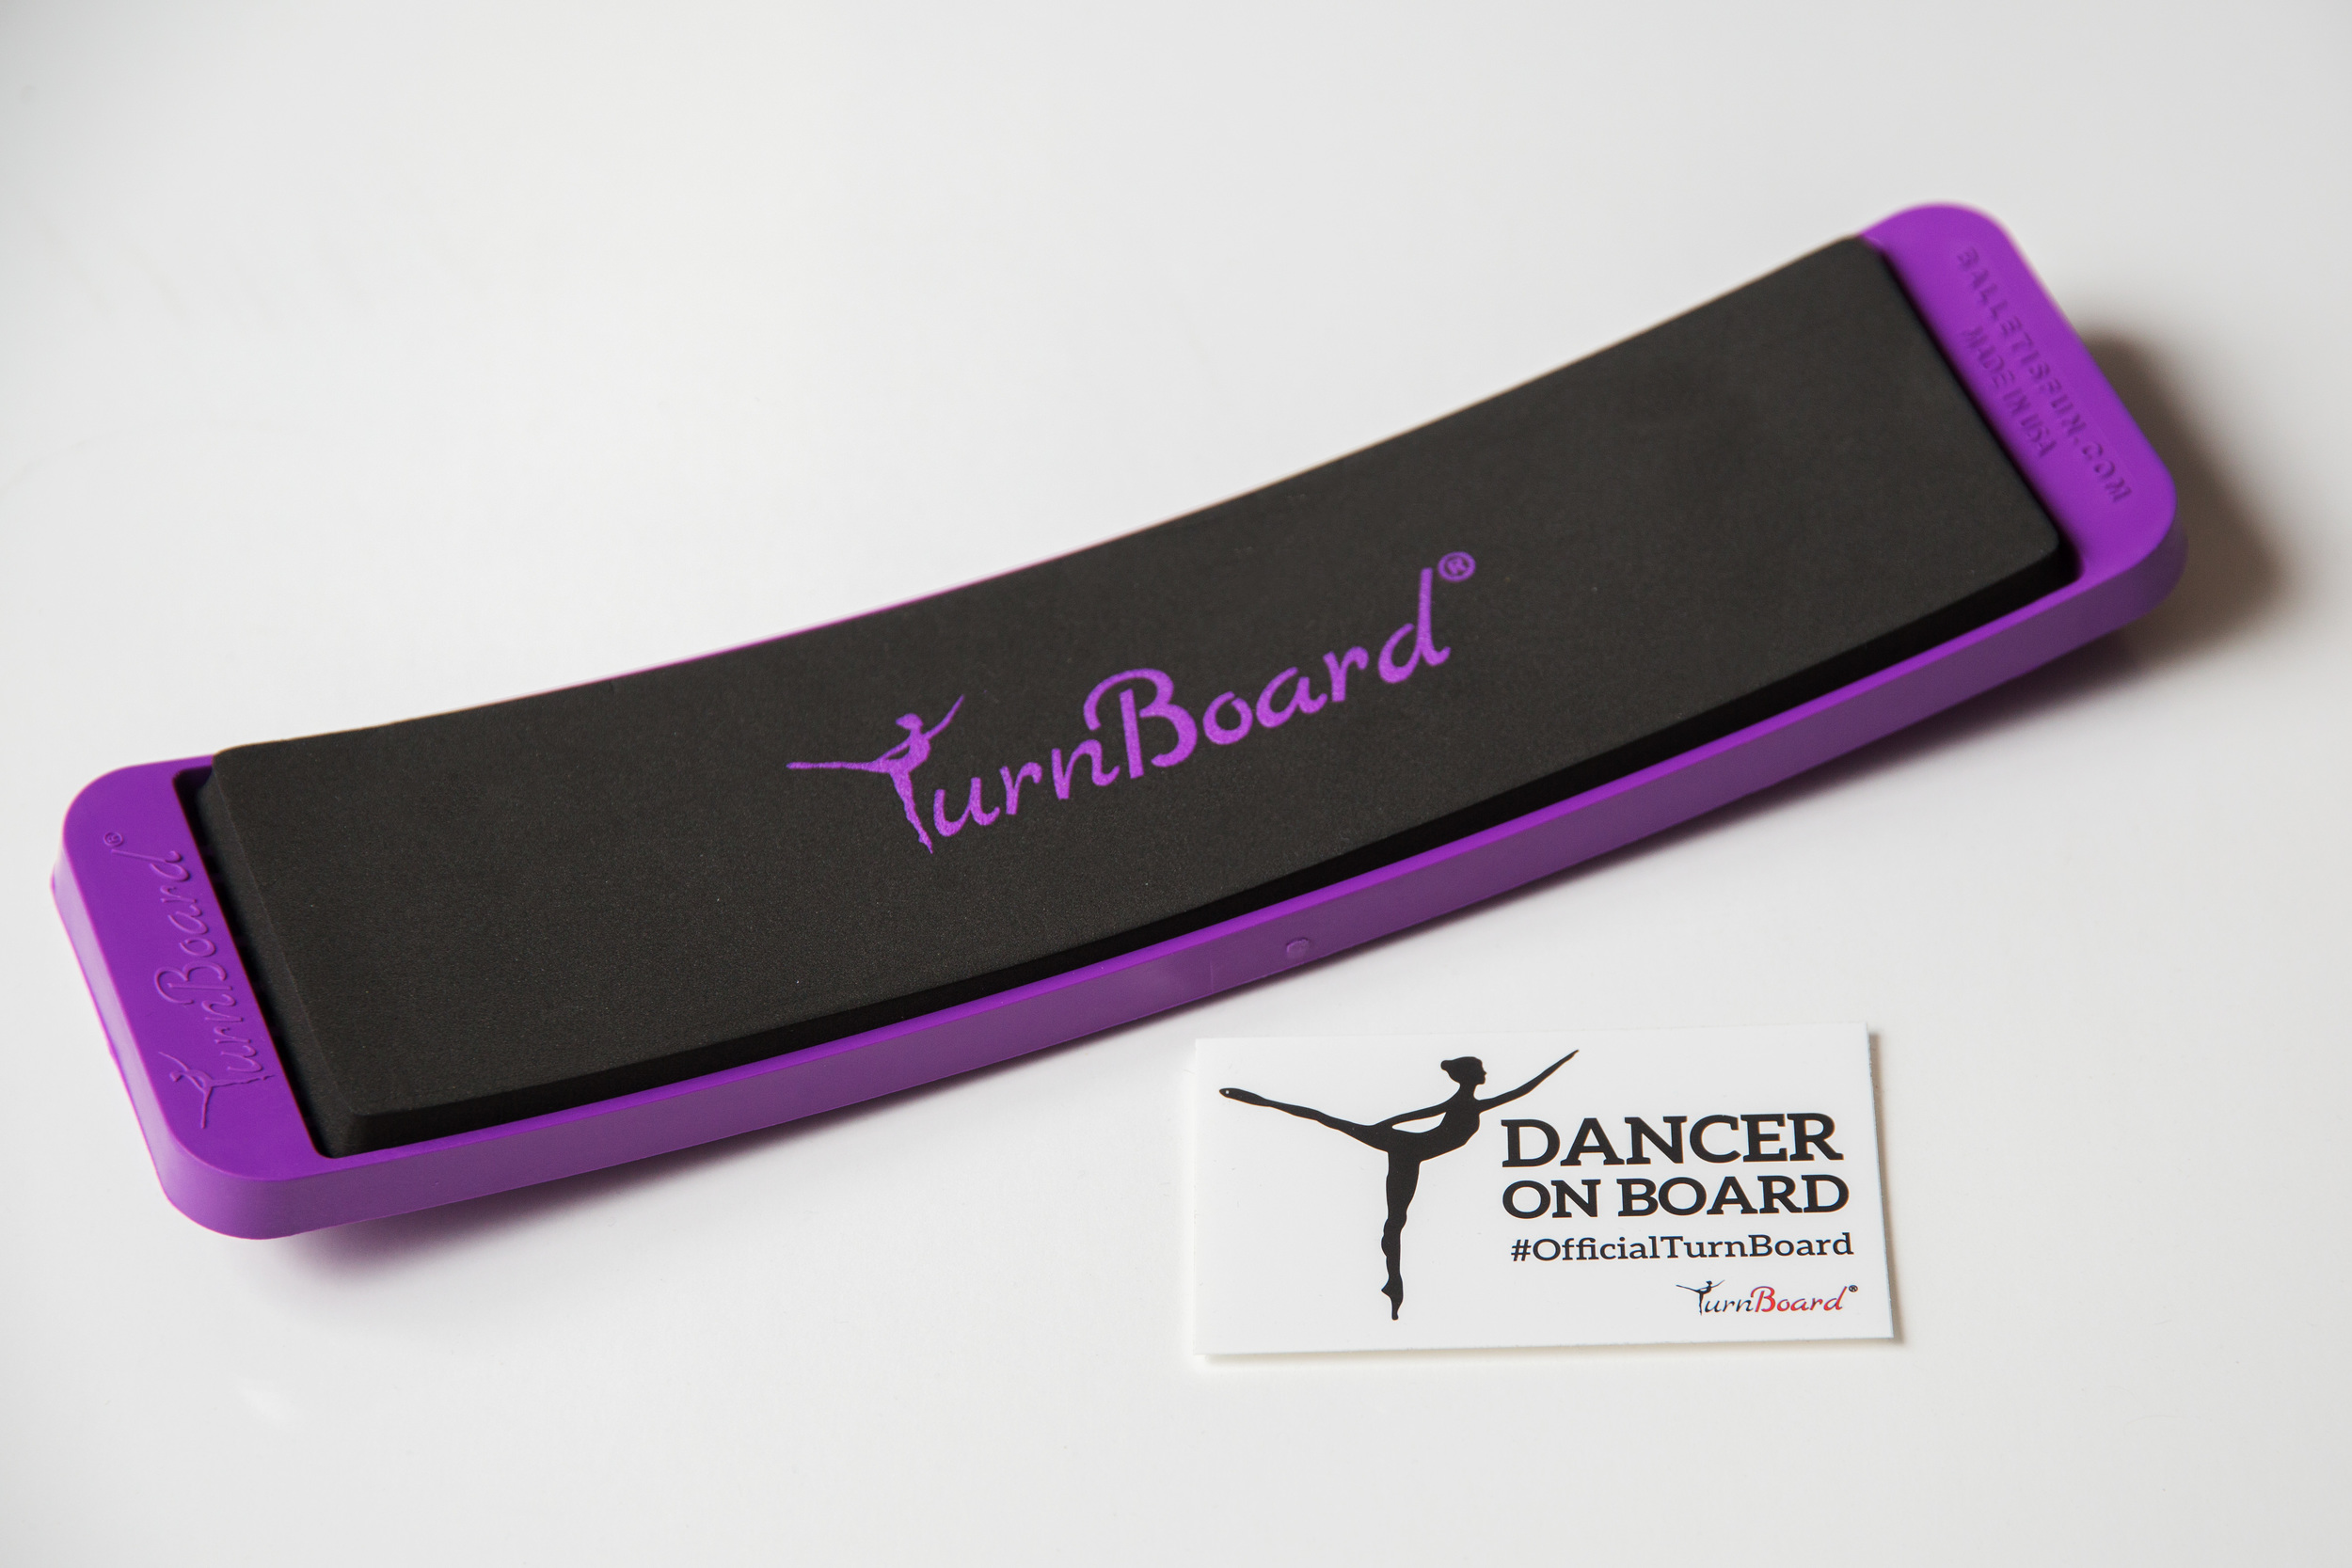 New Balletboard Blue Turning Board for Dancers Carrying bag included 